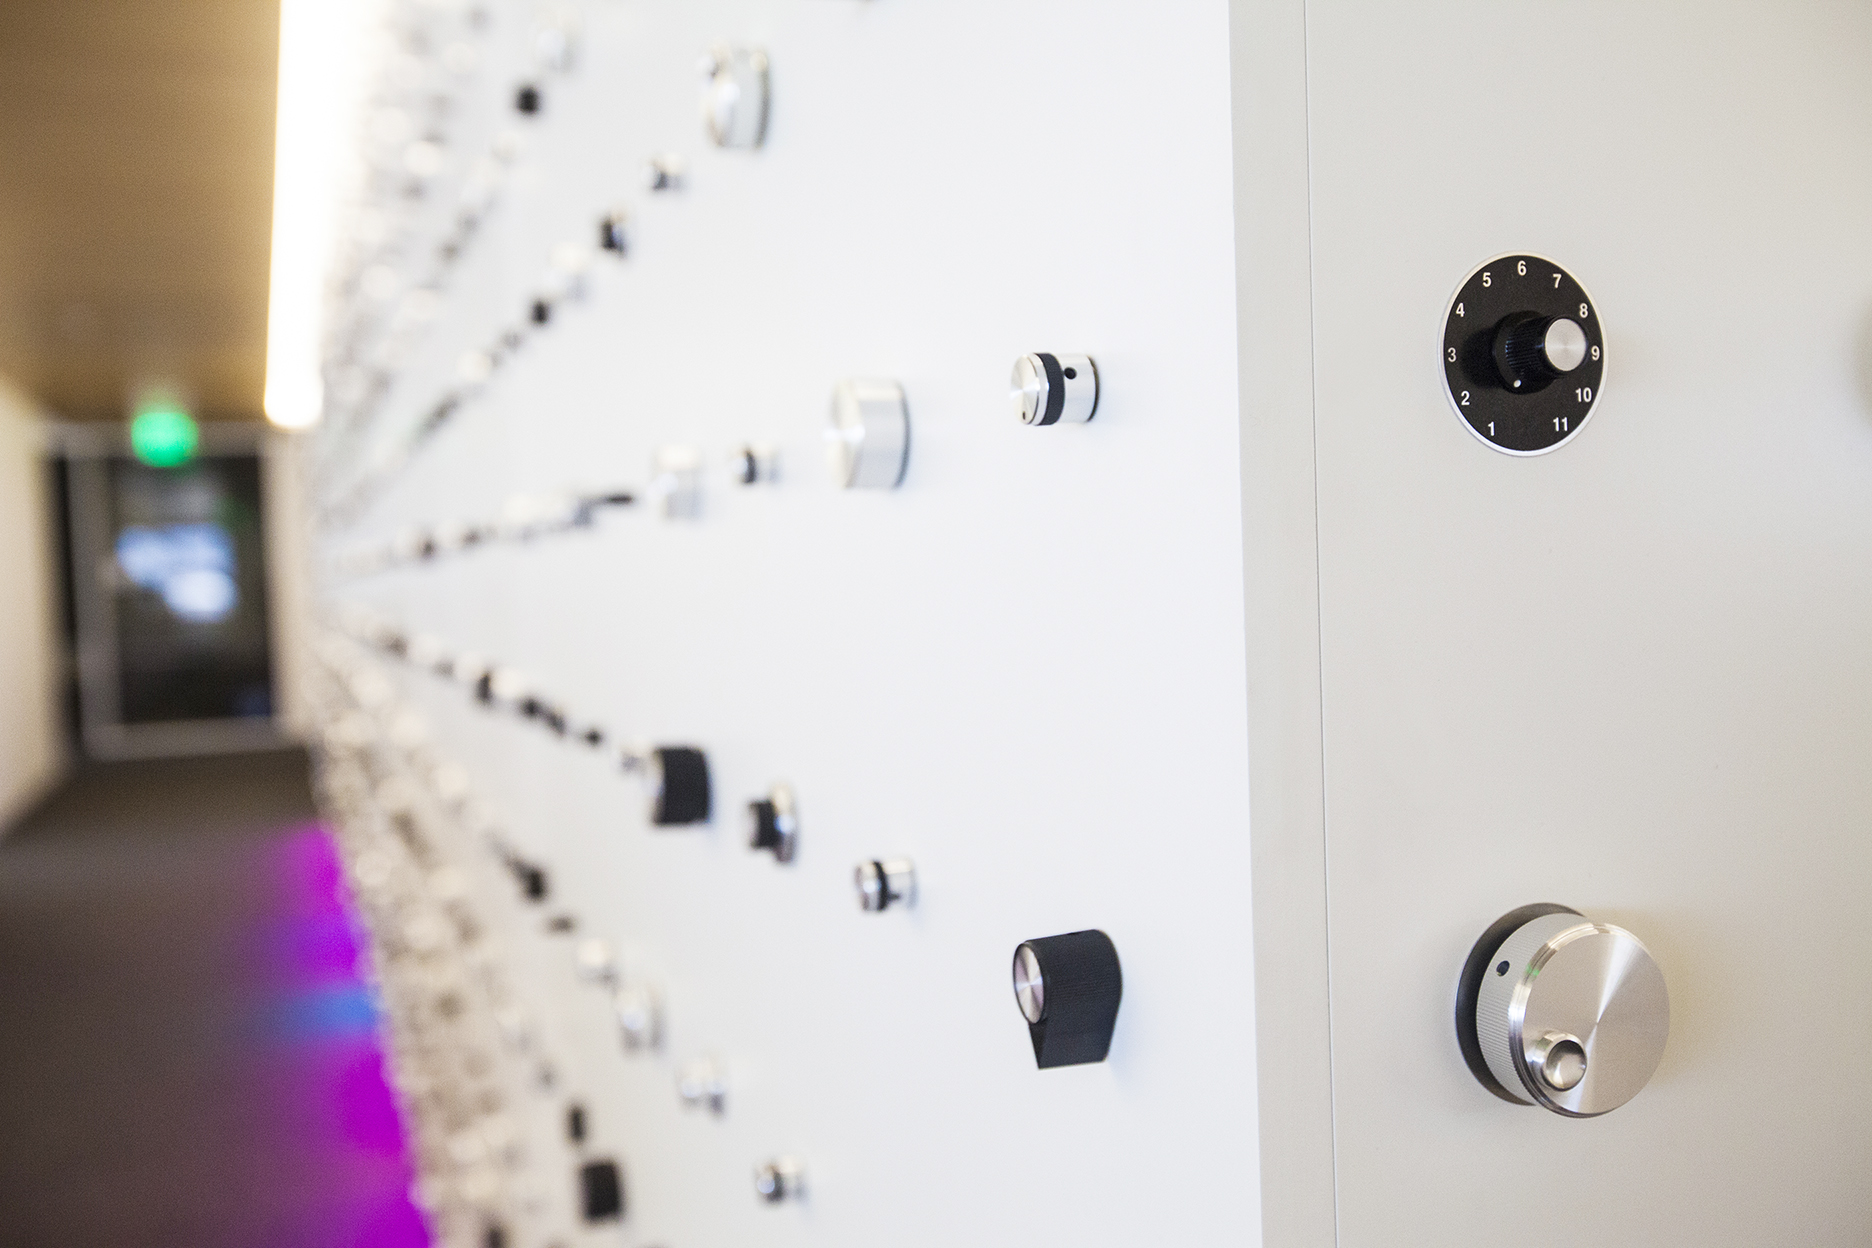  This knob goes to 11.... turning up the fun in this wall installation at the Dolby office headquarters in San Francisco. The interactive art piece has 1287 movable knobs across the 40 foot wall. 